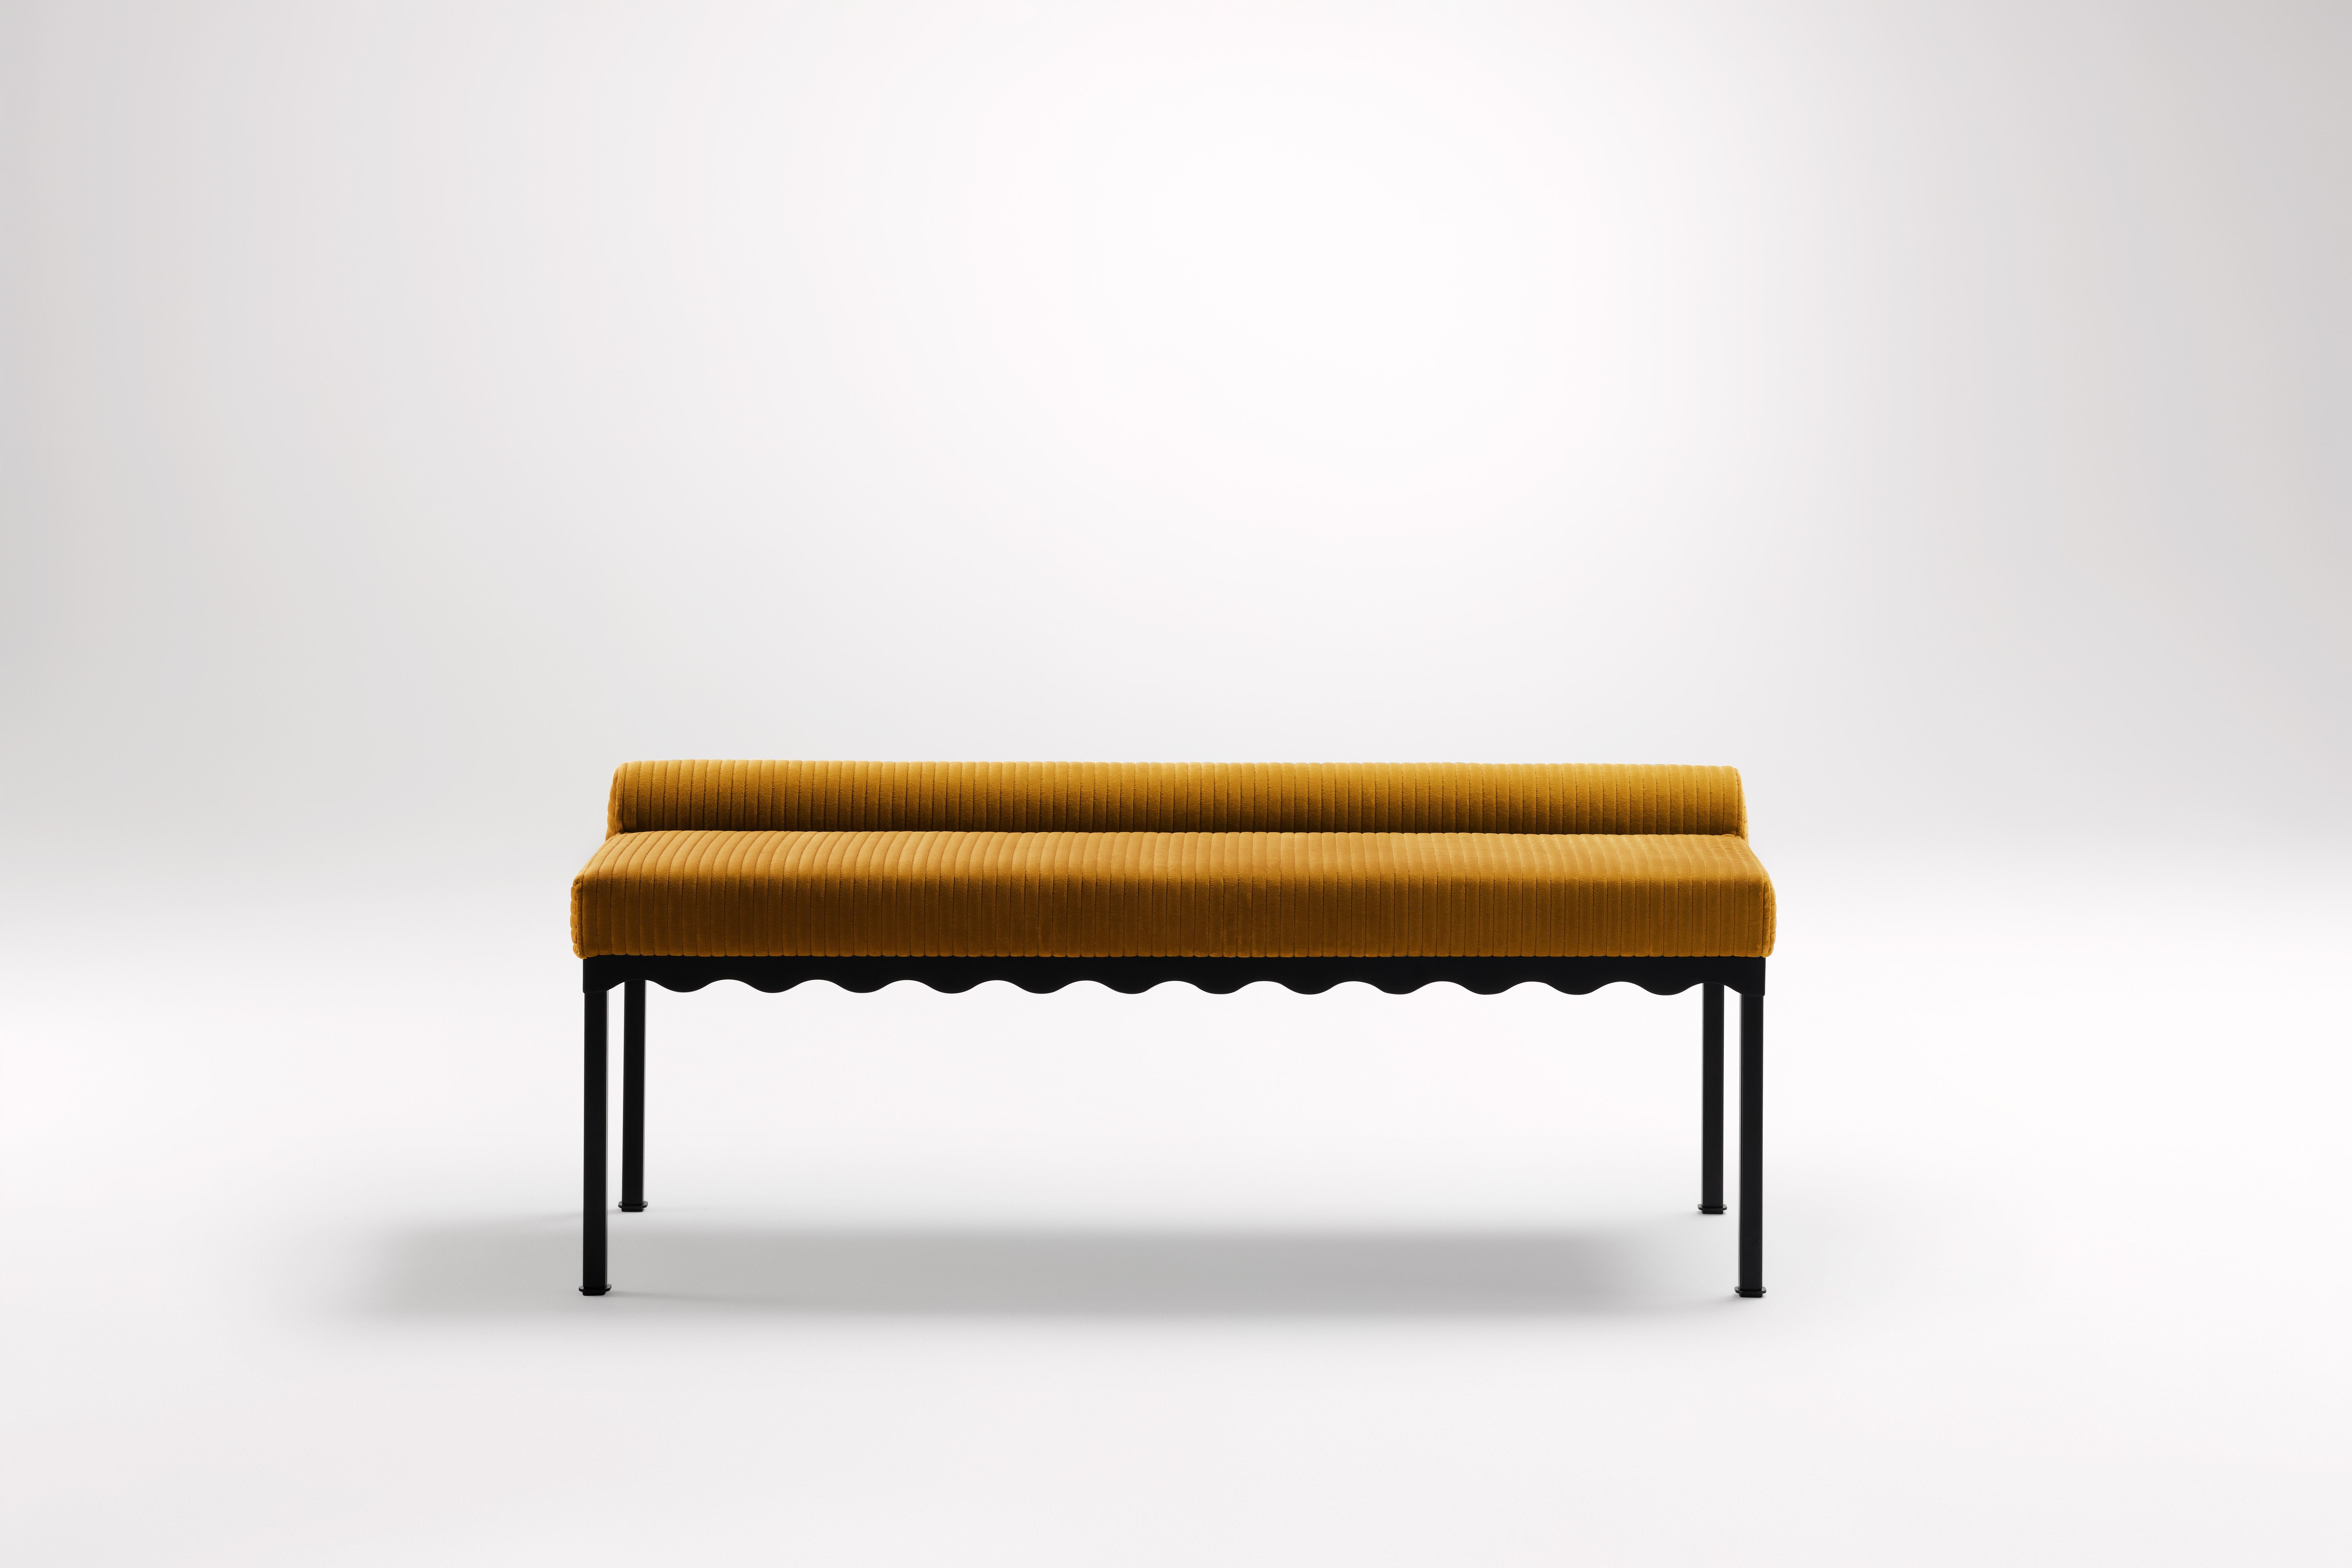 Mikado Bellini 1340 Bench by Coco Flip
Dimensions: D 134 x W 54 x H 52.5 cm
Materials: Timber / Upholstered tops, Powder-coated steel frame. 
Weight: 20 kg
Frame Finishes: Textura Black.

Coco Flip is a Melbourne based furniture and lighting design